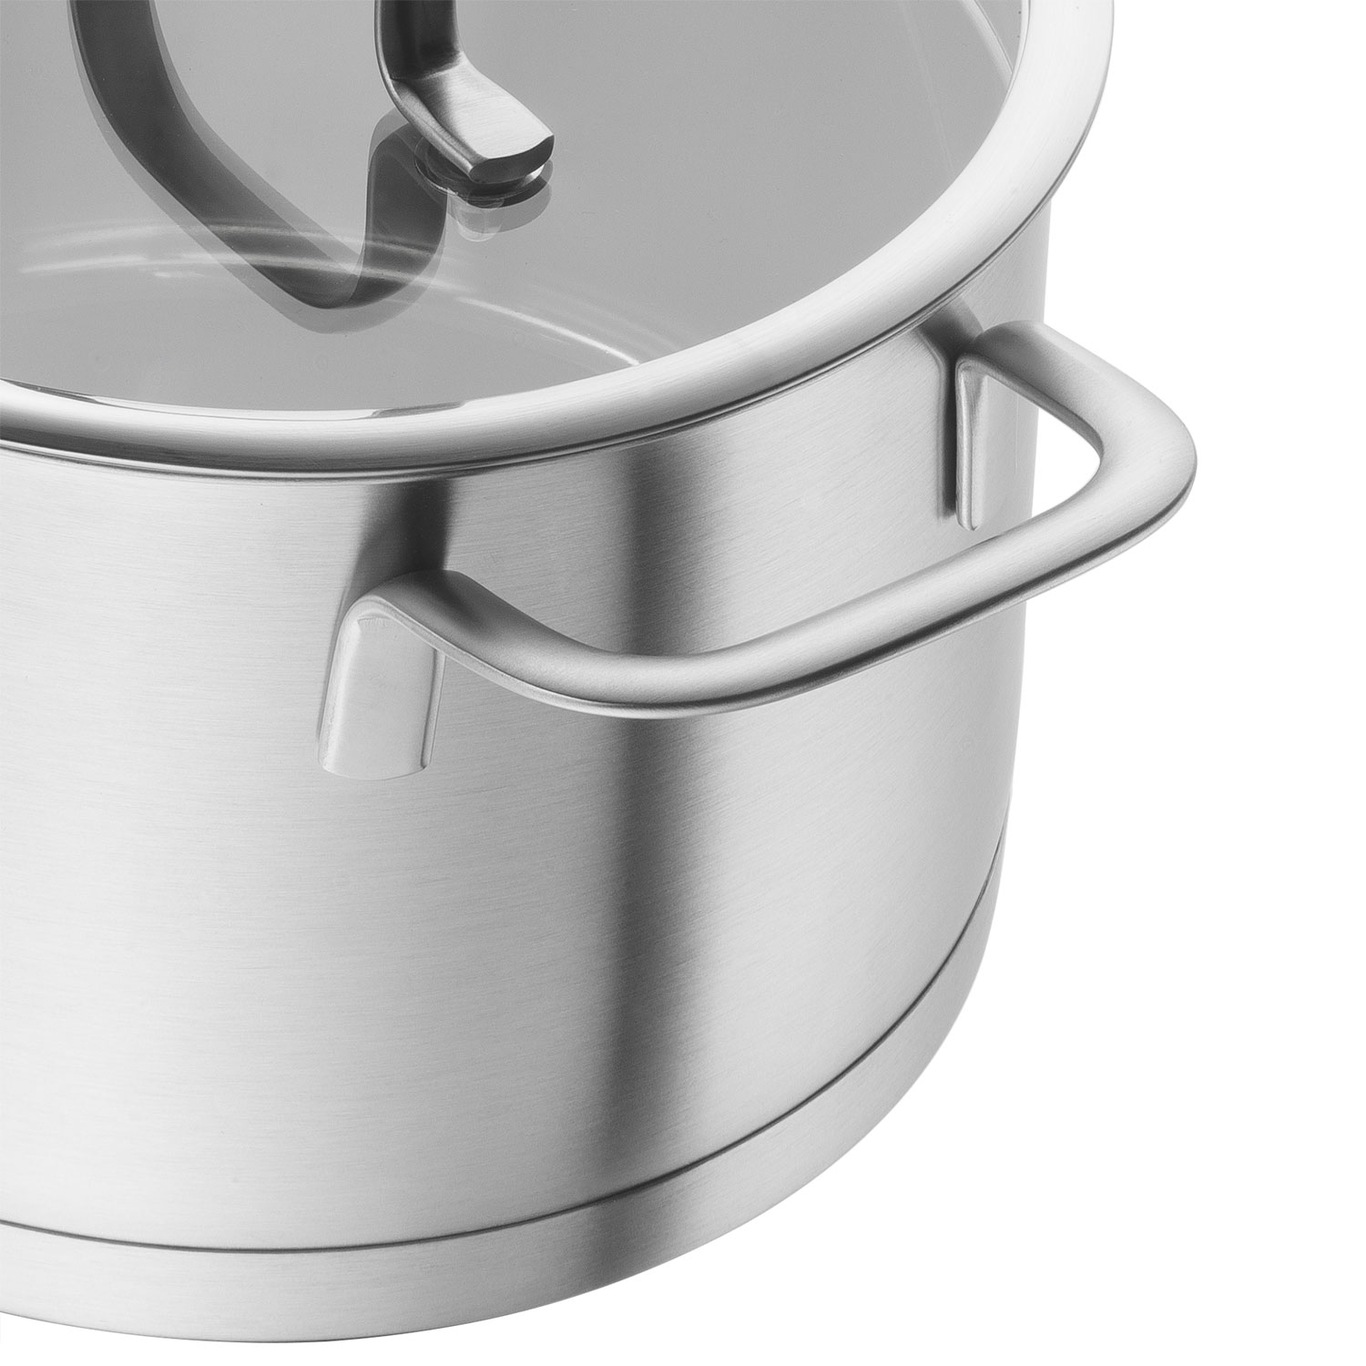 https://royaldesign.com/image/2/zwilling-true-flow-pot-set-stainless-steel-3-pieces-4?w=800&quality=80